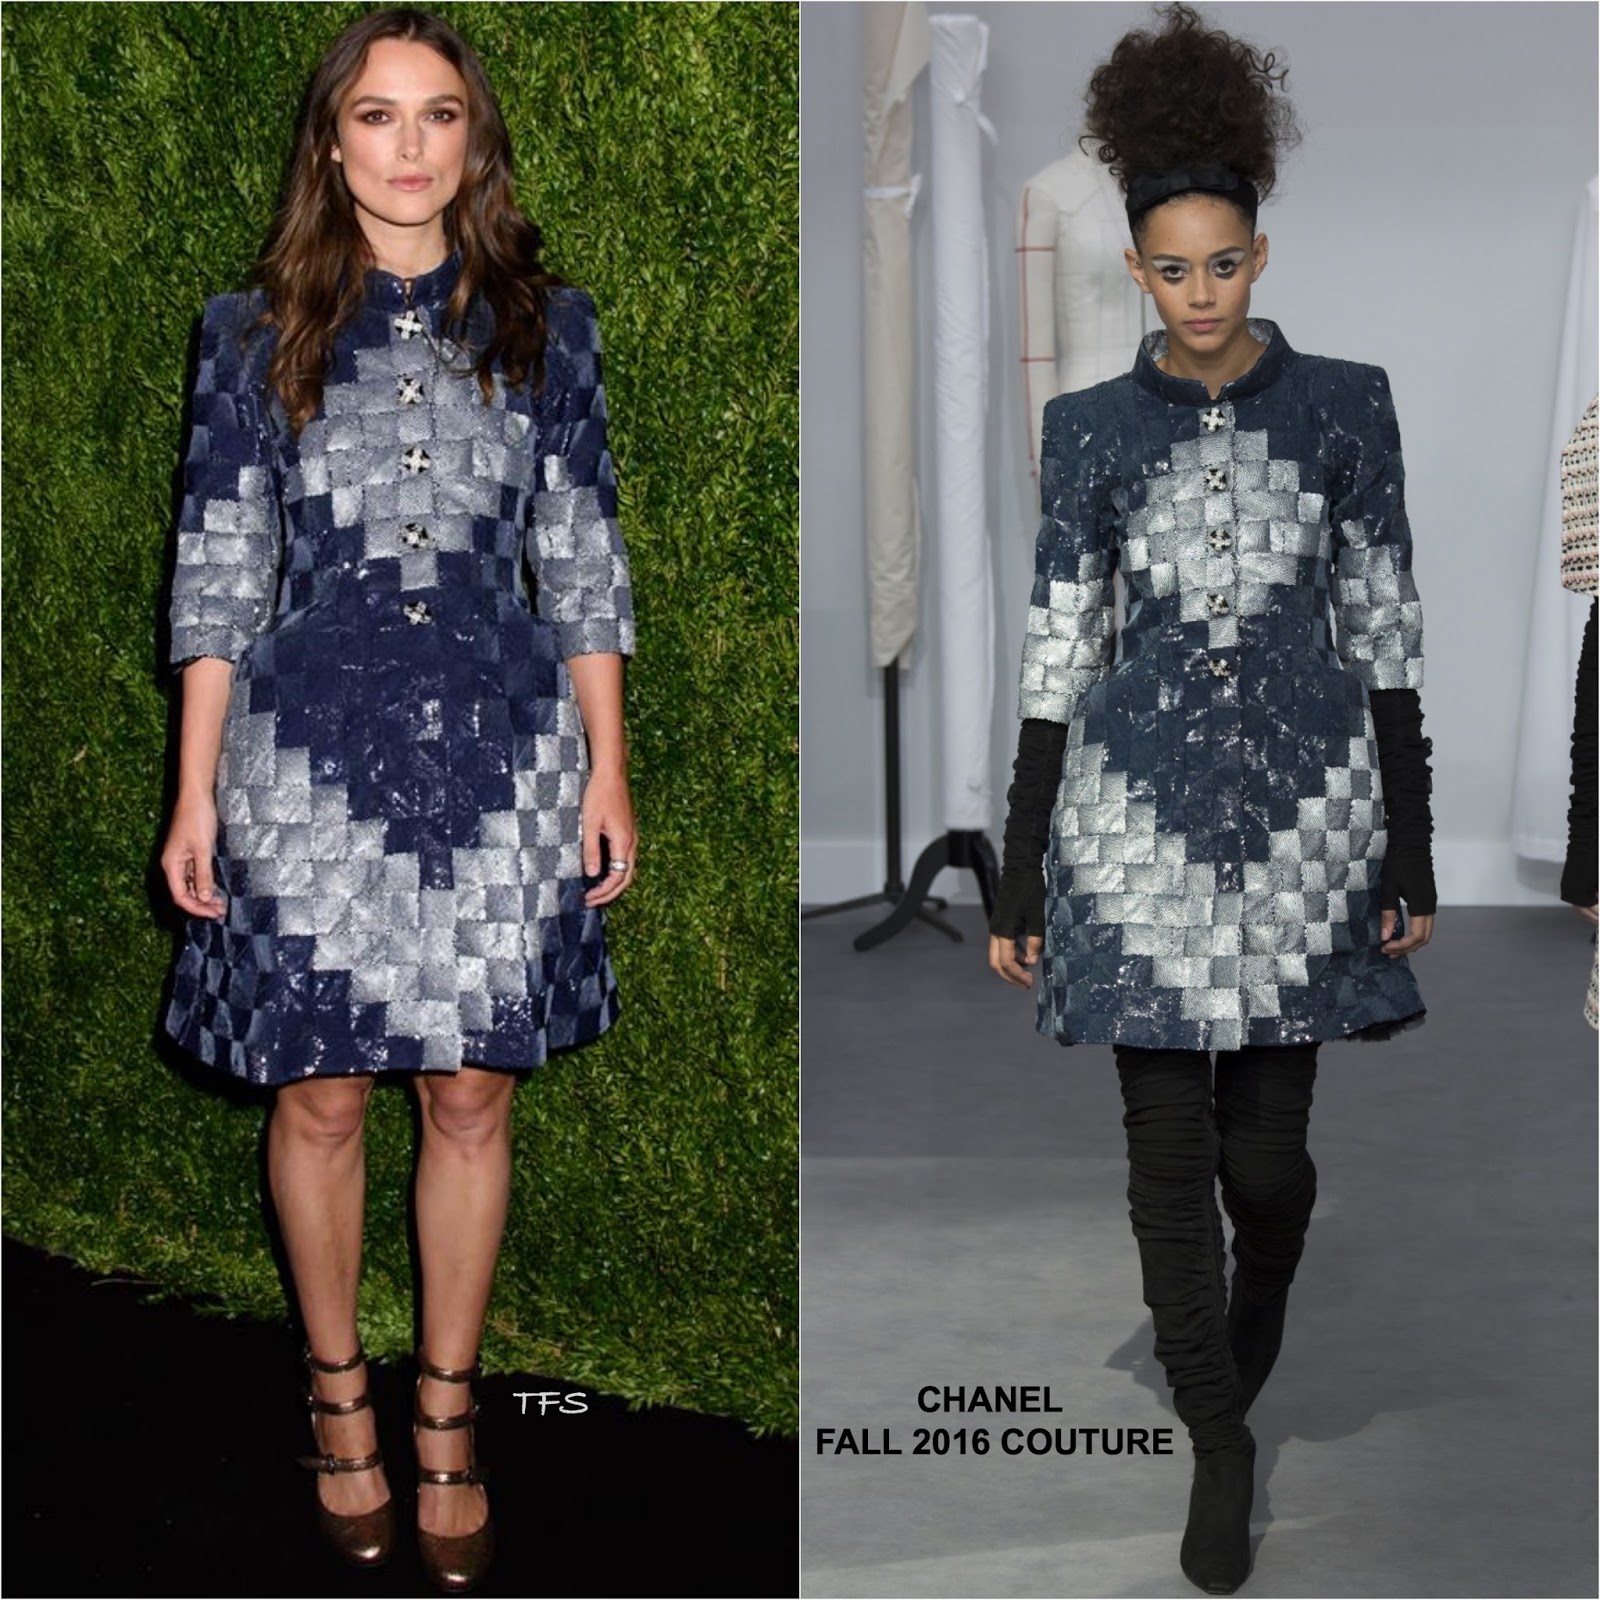 Keira Knightley in Chanel at the Chanel Fine Jewelry Dinner in her